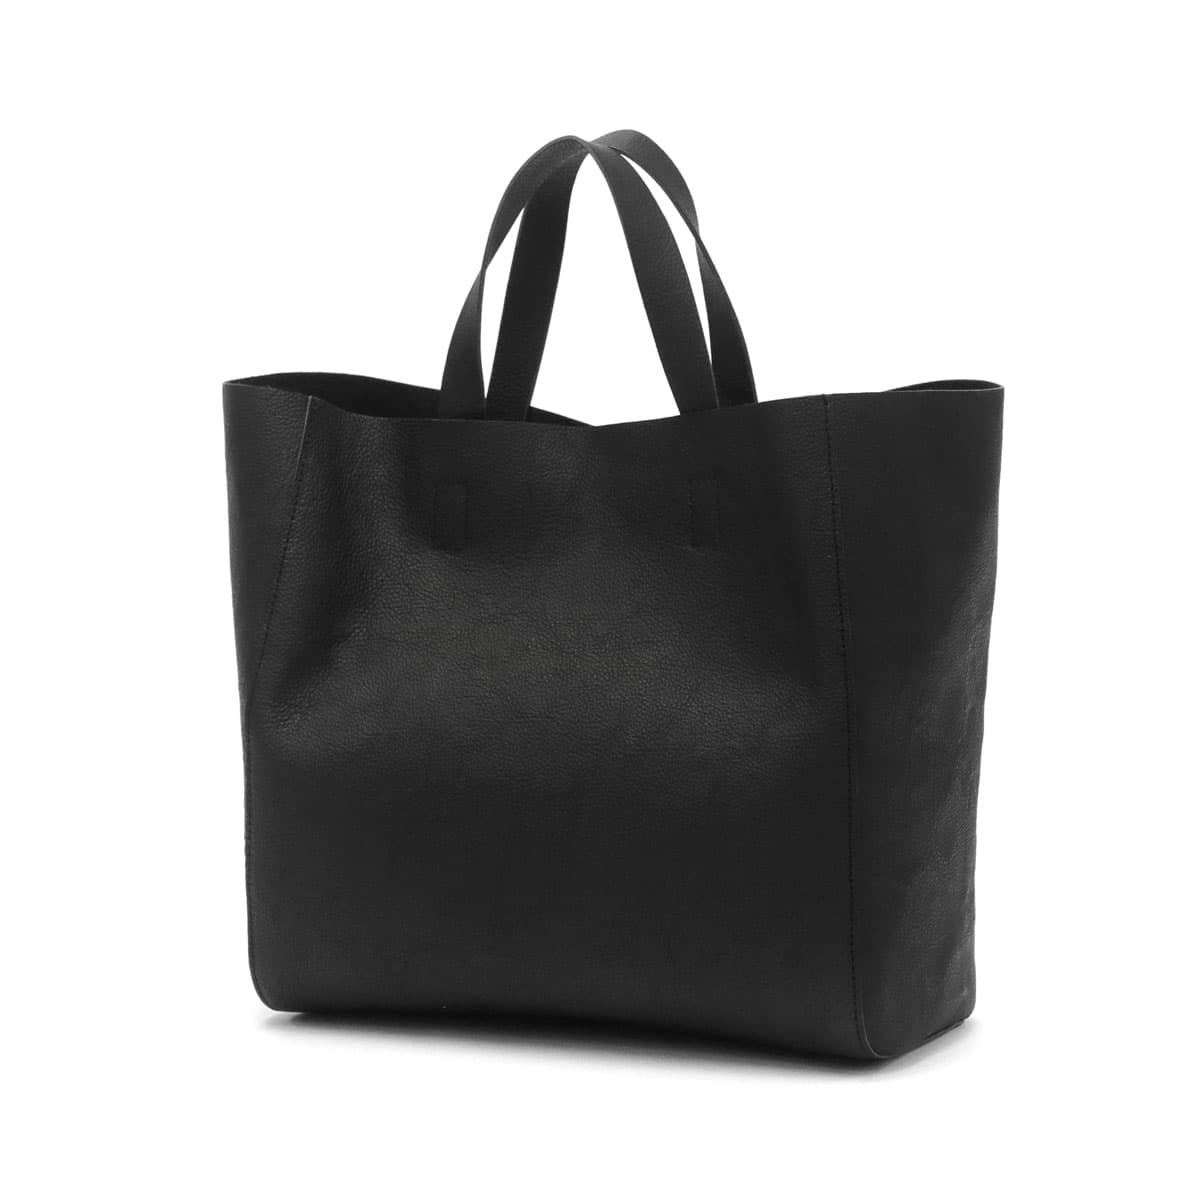 SLOW スロウ embossing leather tote bag S トートバッグ 300S135J 